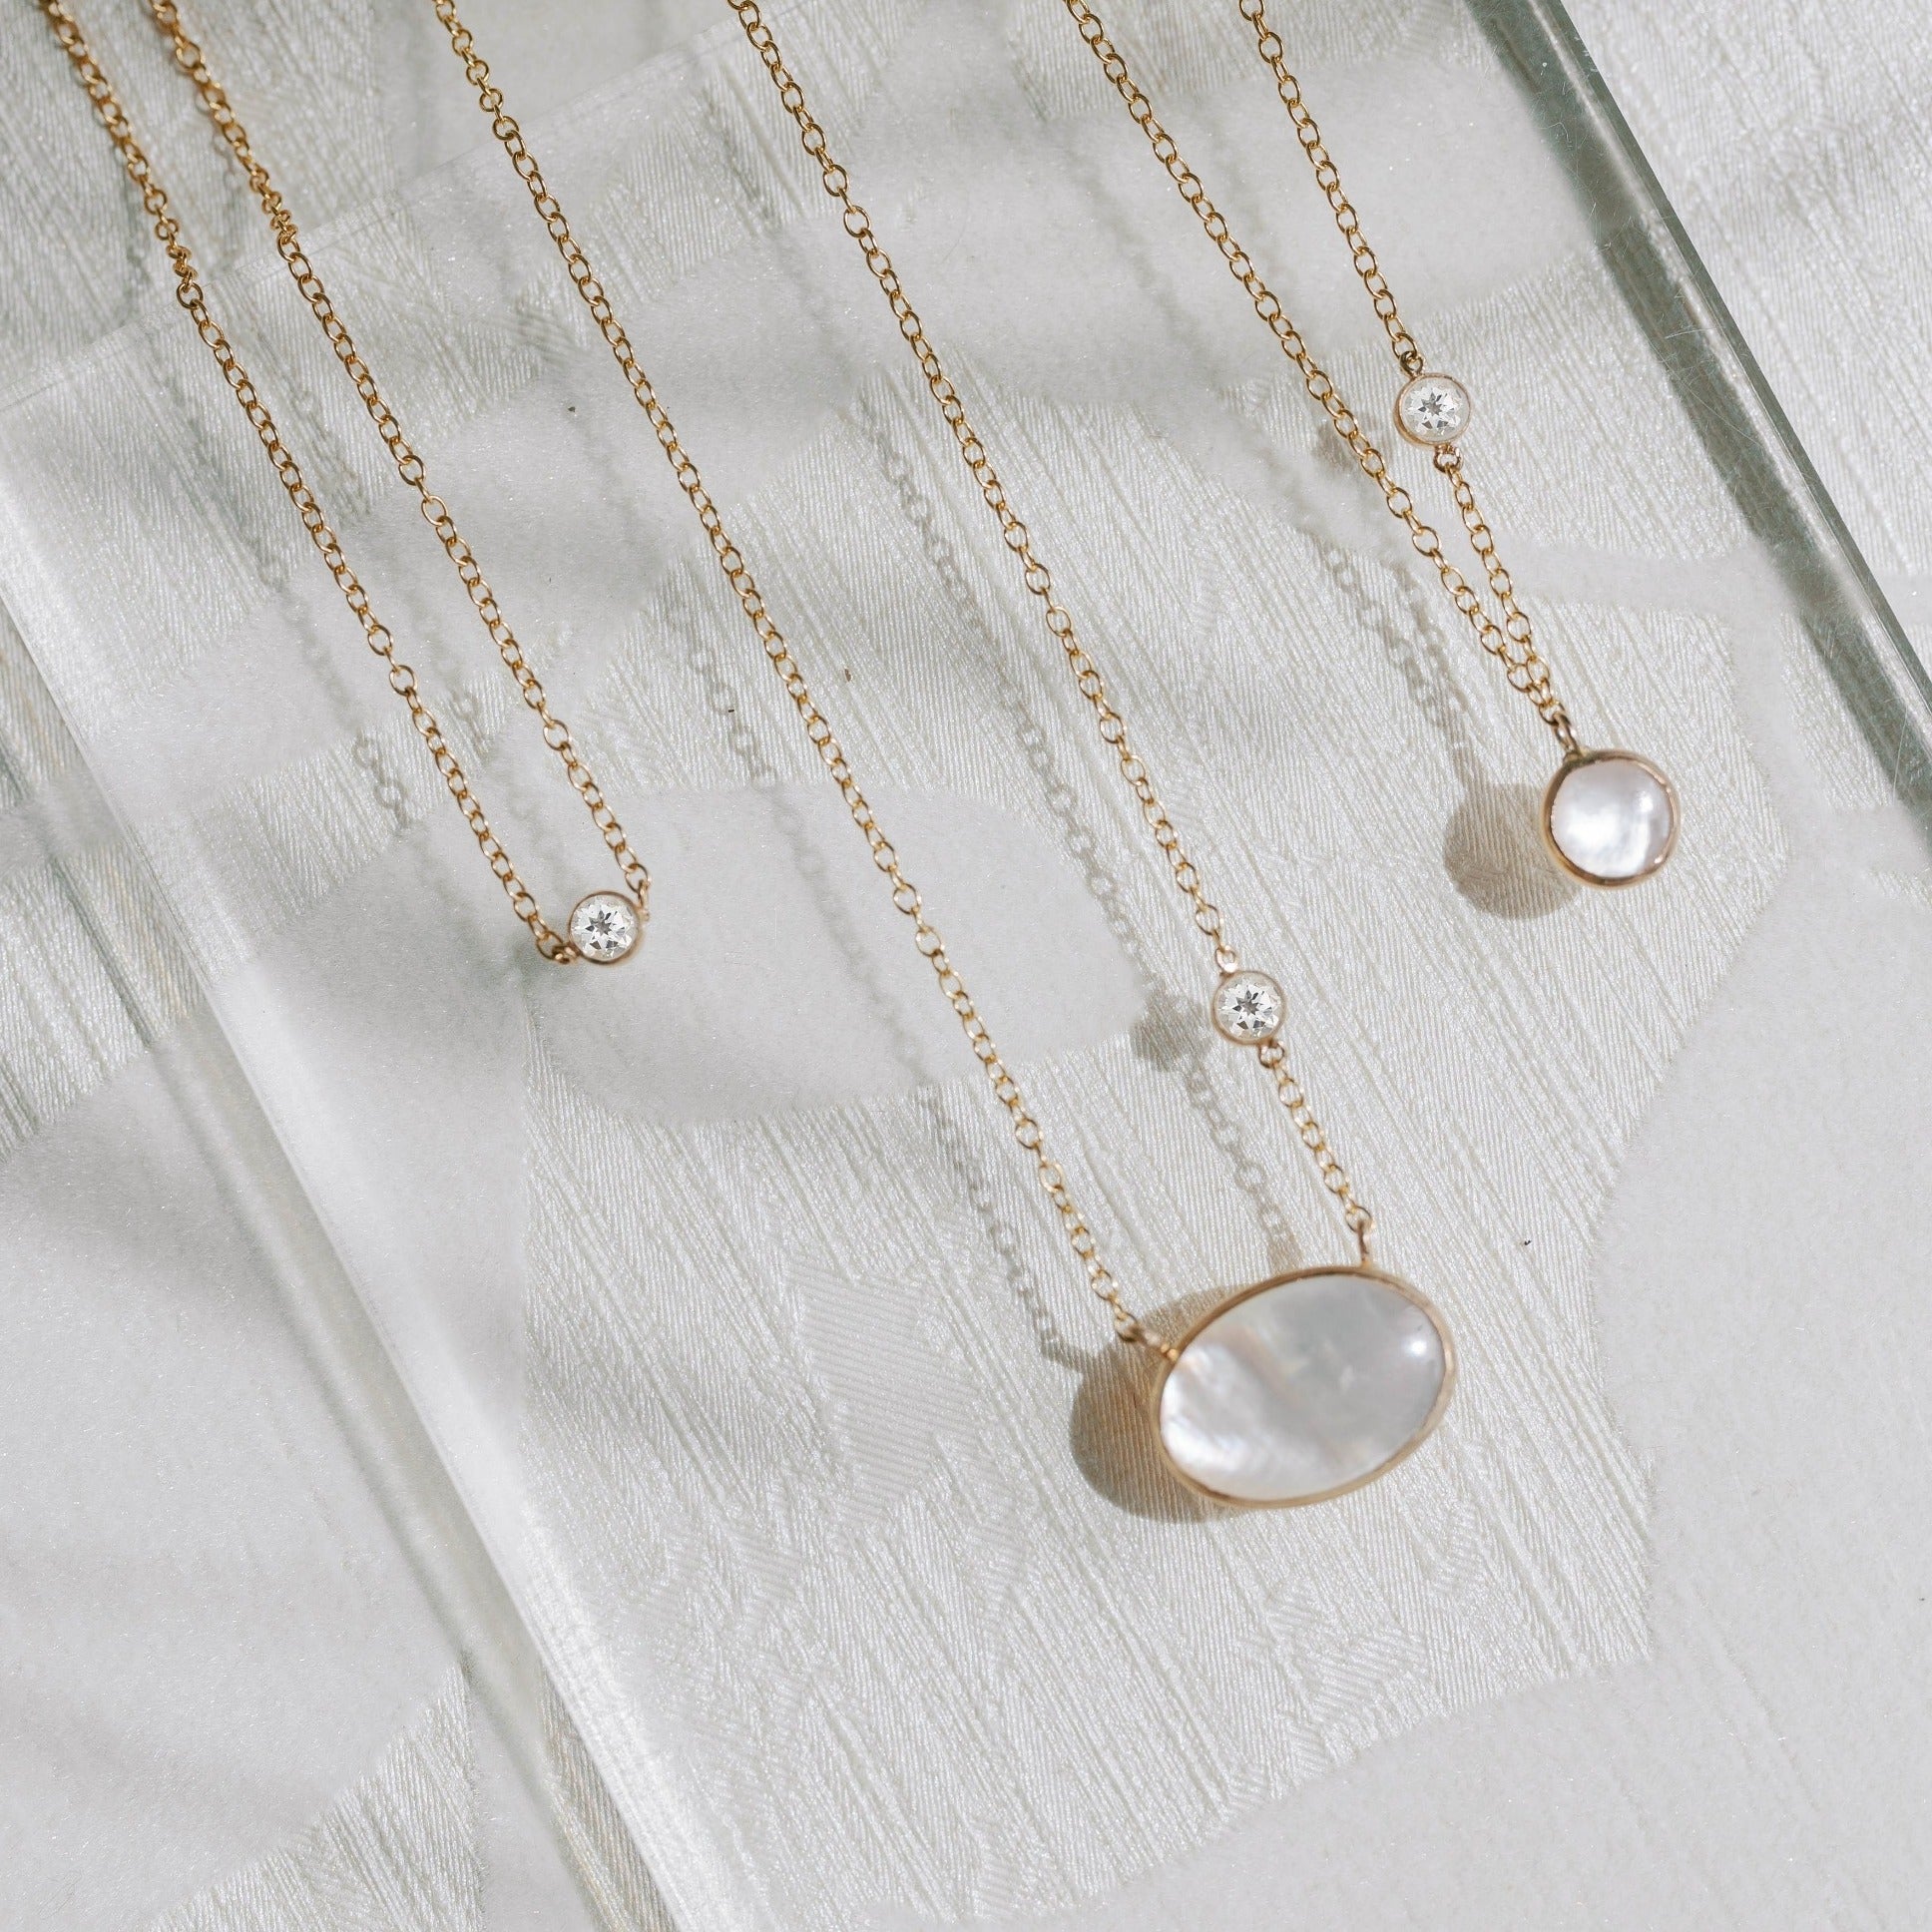 Mother of pearl pendant necklaces featuring small white topaz stones. The gold is recycled